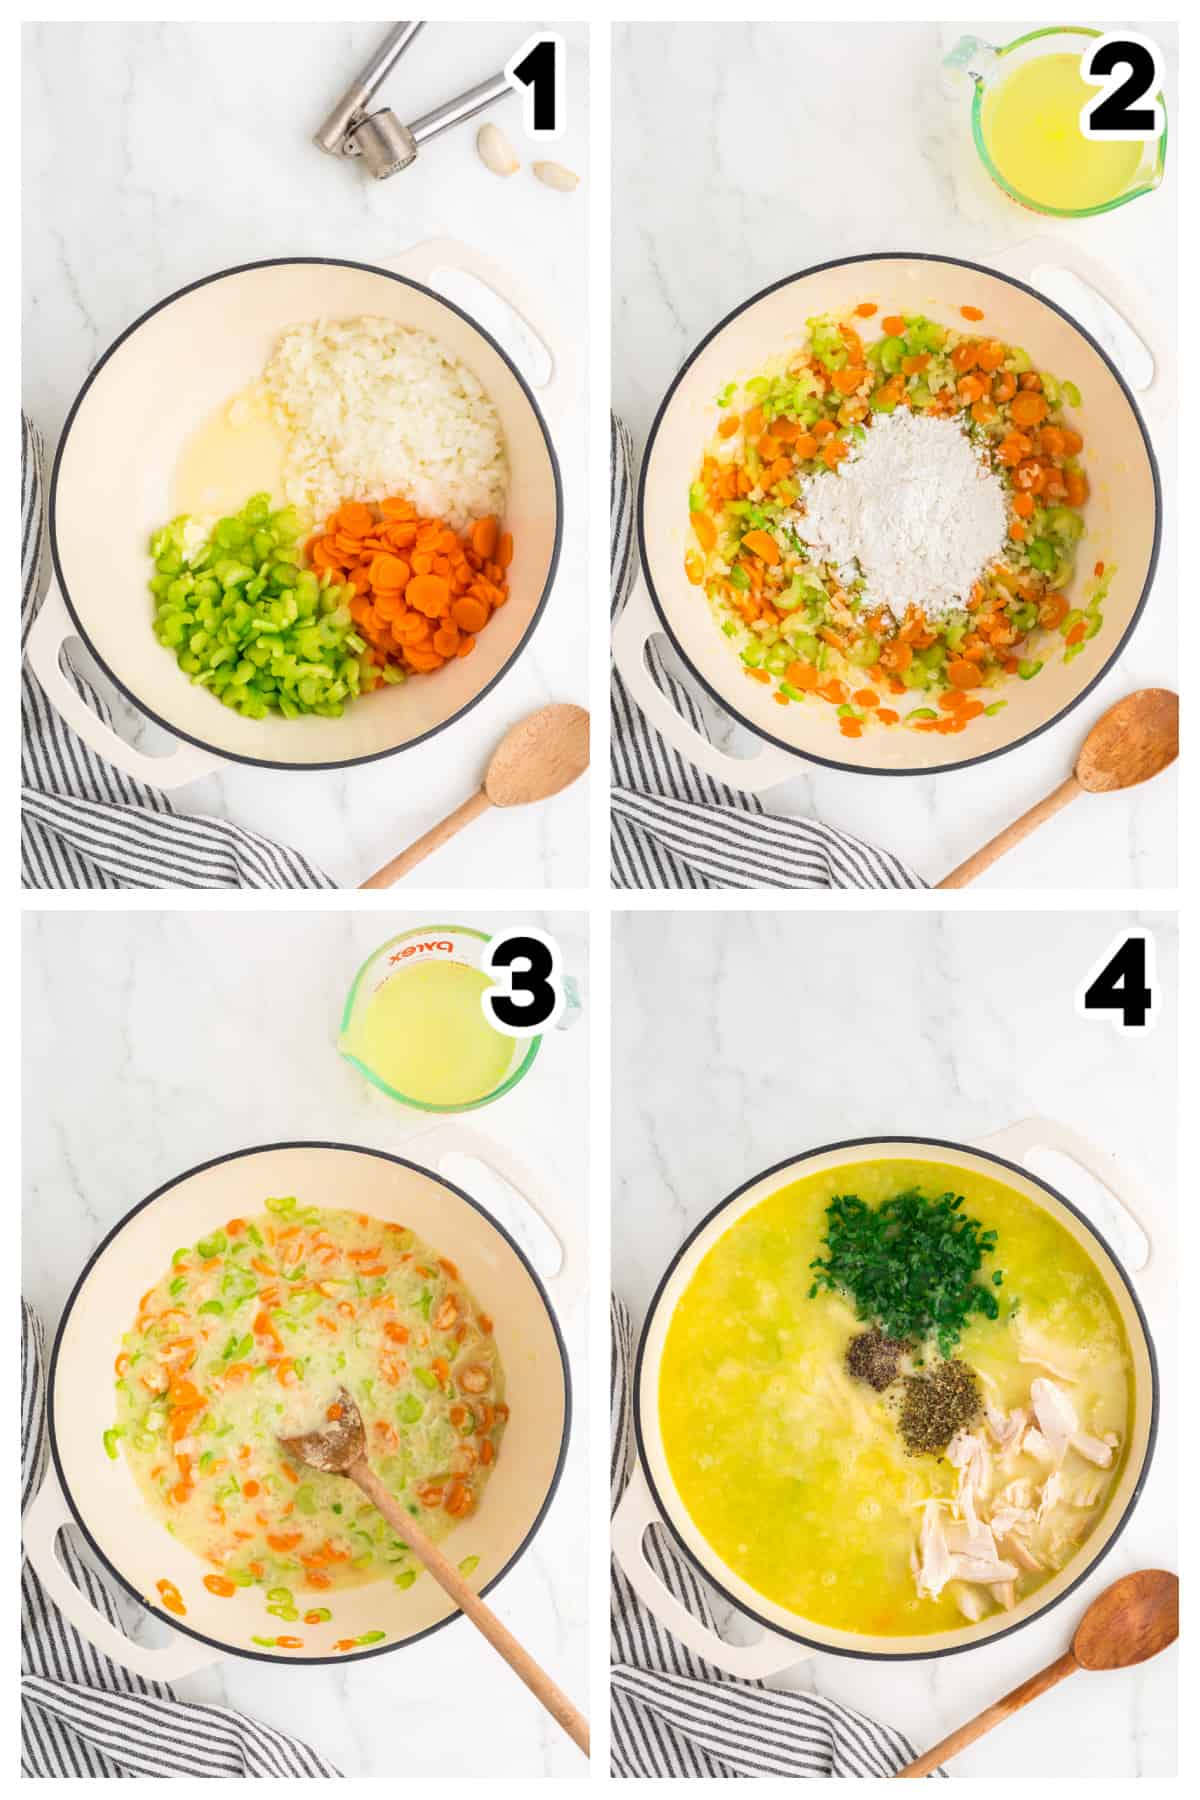 Collage showing how to make turkey noodle soup.